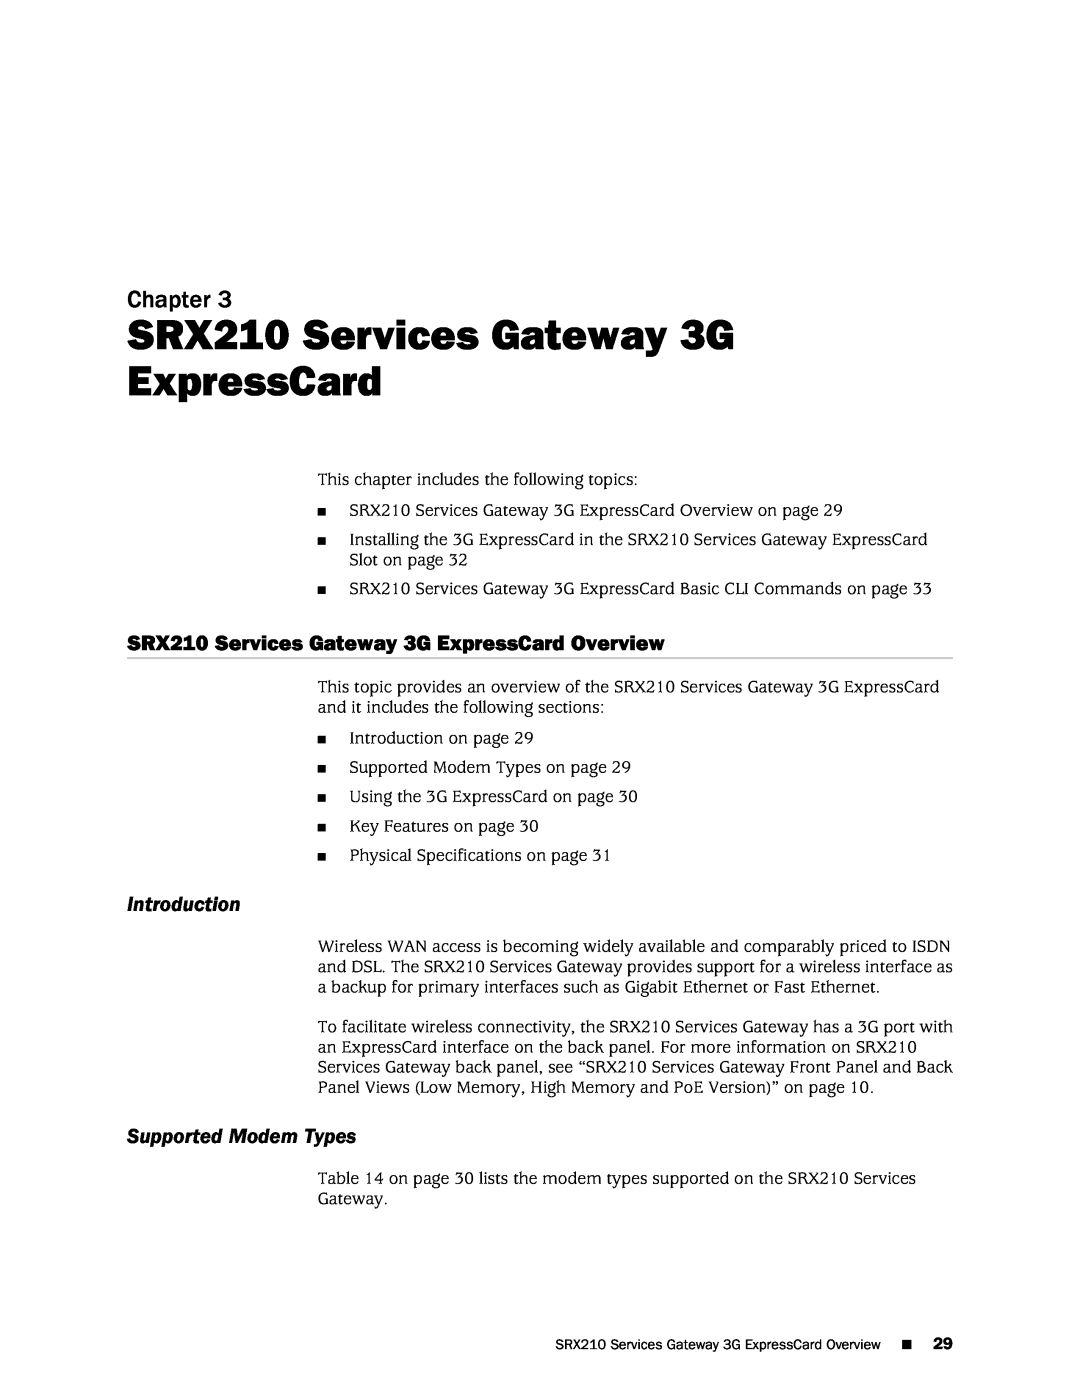 Juniper Networks SRX 210 SRX210 Services Gateway 3G ExpressCard Overview, Introduction, Supported Modem Types, Chapter 